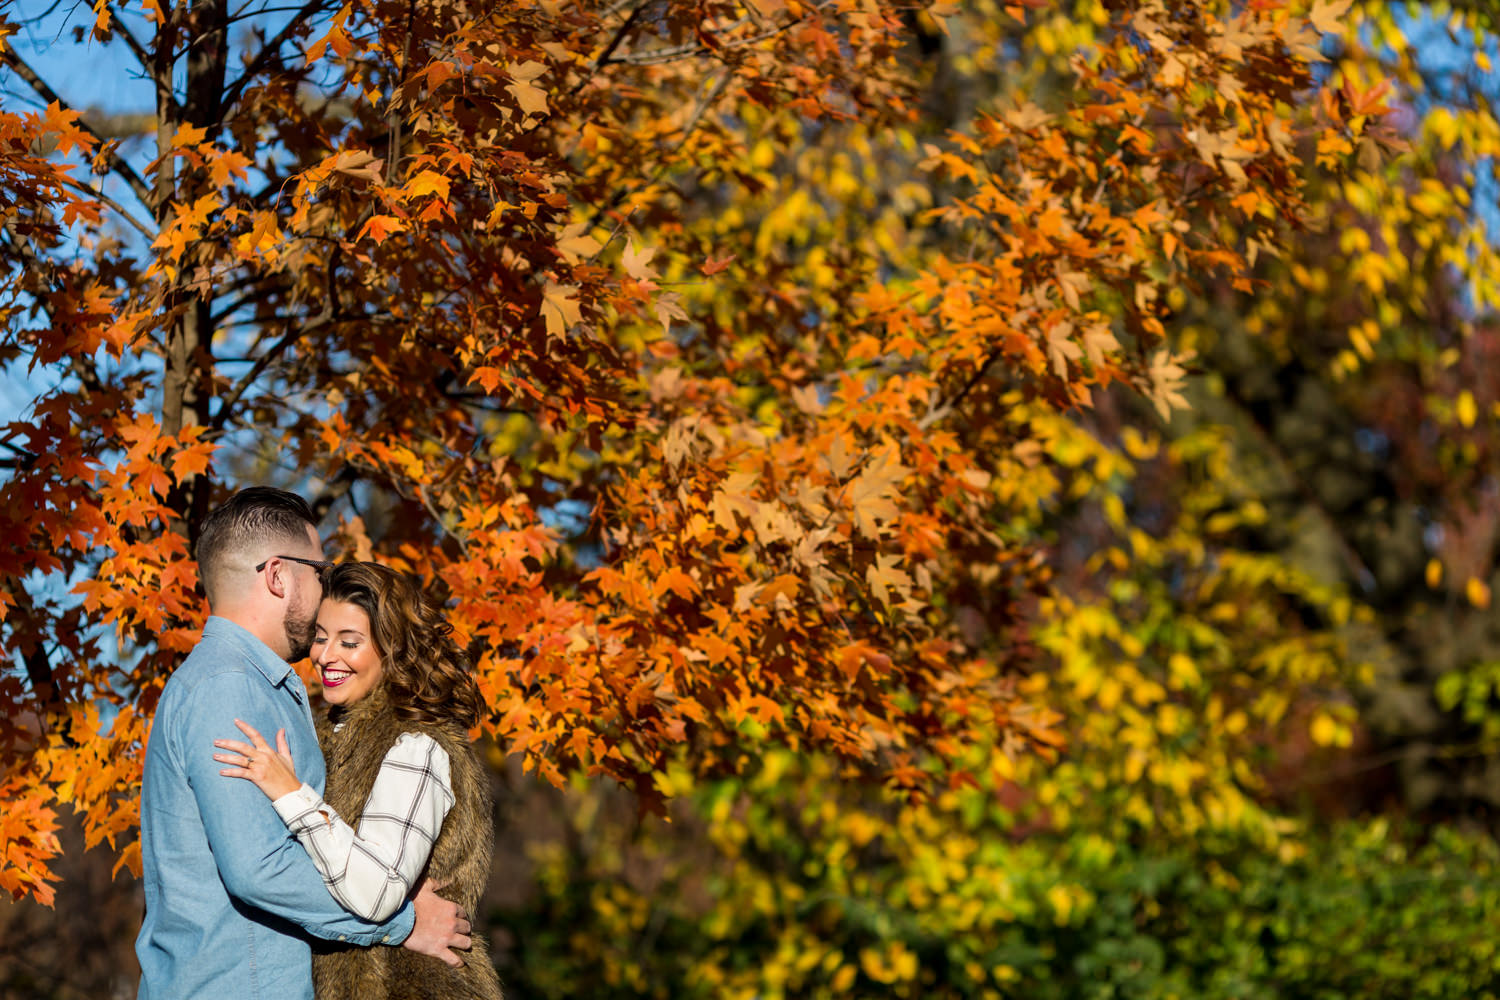 This engagement session was in Frederick Maryland, we were at a park in the fall, you can see a gorgeous orange and yellow tree in the background and the couple cuddling and laughing in the foreground, she is in a seasonal fall vest, Procopio Photography, best top Washington DC photographer, best top Maryland photographer, best top Virginia photographer, best top DMV photographer, best top wedding photographer, best top commercial photographer, best top portrait photographer, best top boudoir photographer, modern fine art portraits, dramatic, unique, different, bold, editorial, photojournalism, award winning photographer, published photographer, memorable images, be different, stand out, engagement photography